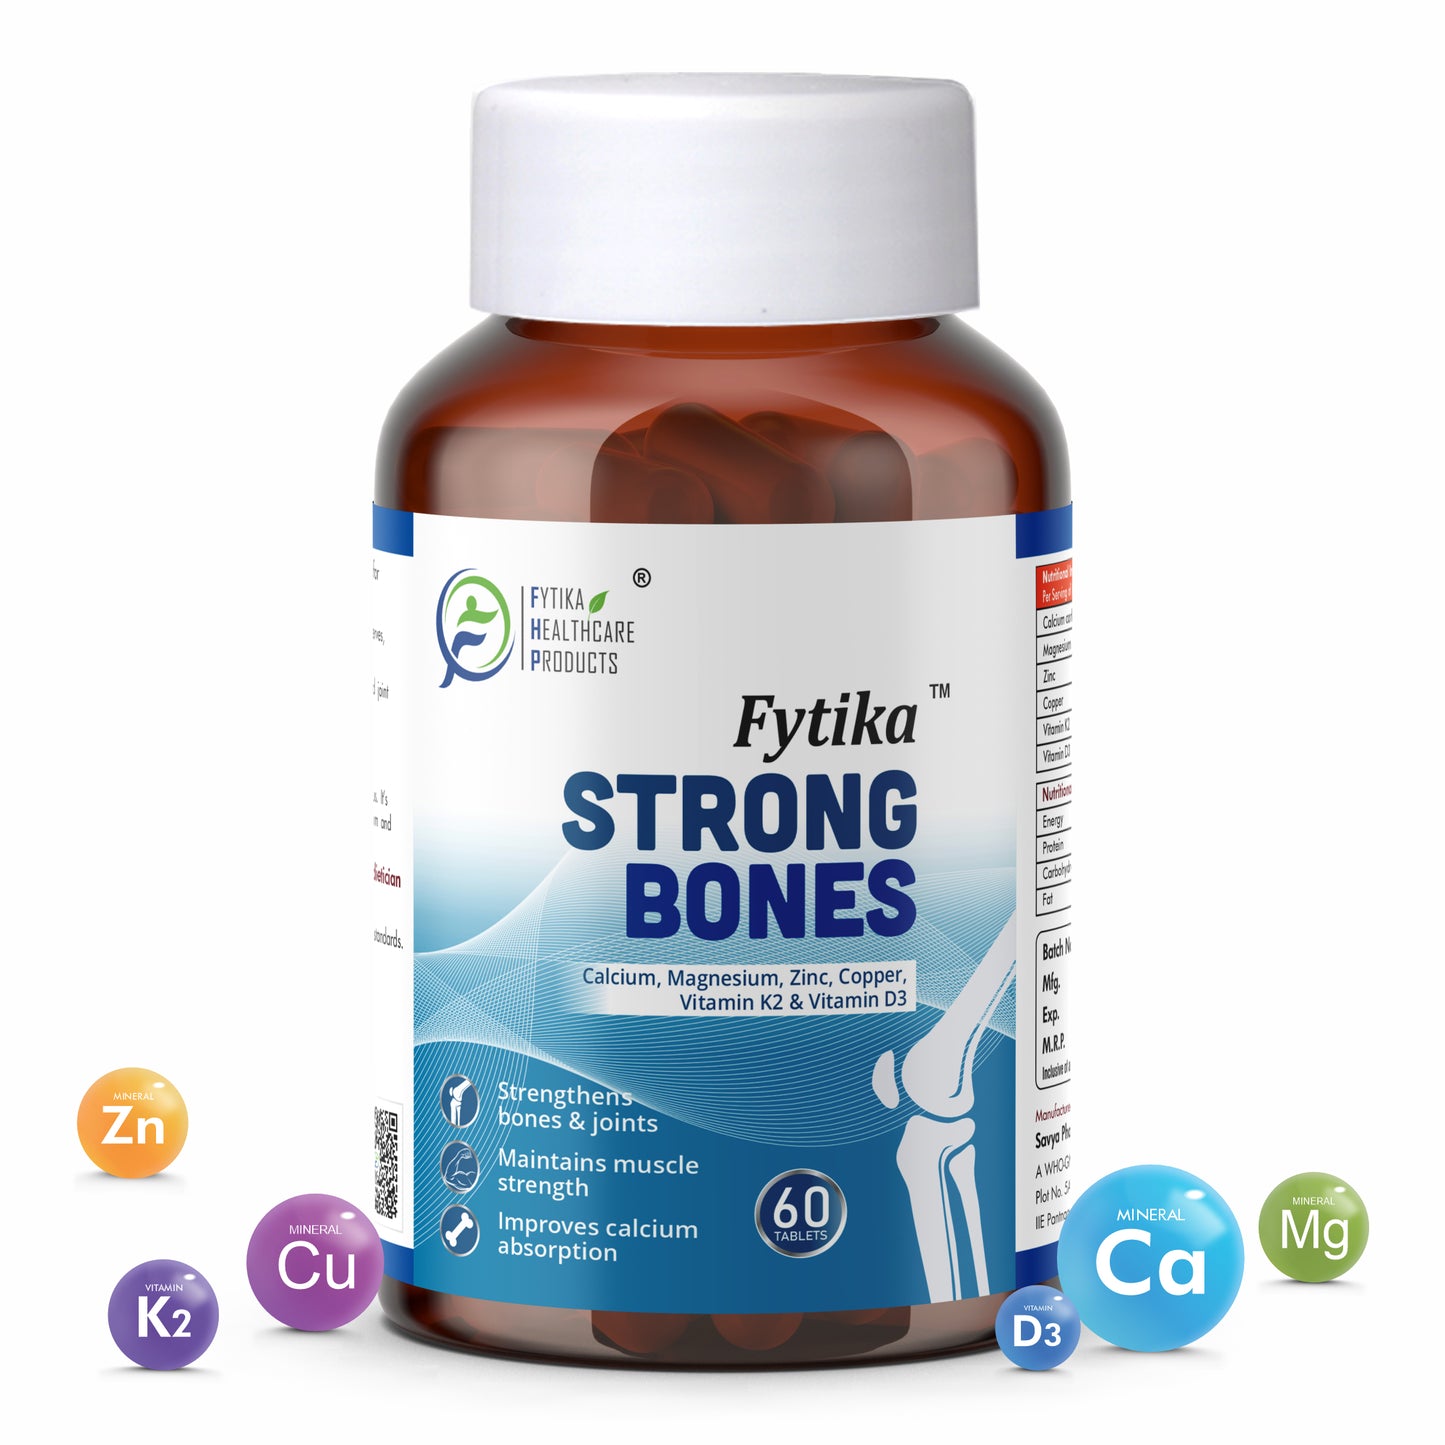 Get FREE Fytika Strong Bones with Fytika Vita 365 & Omega 1000 Combo Pack